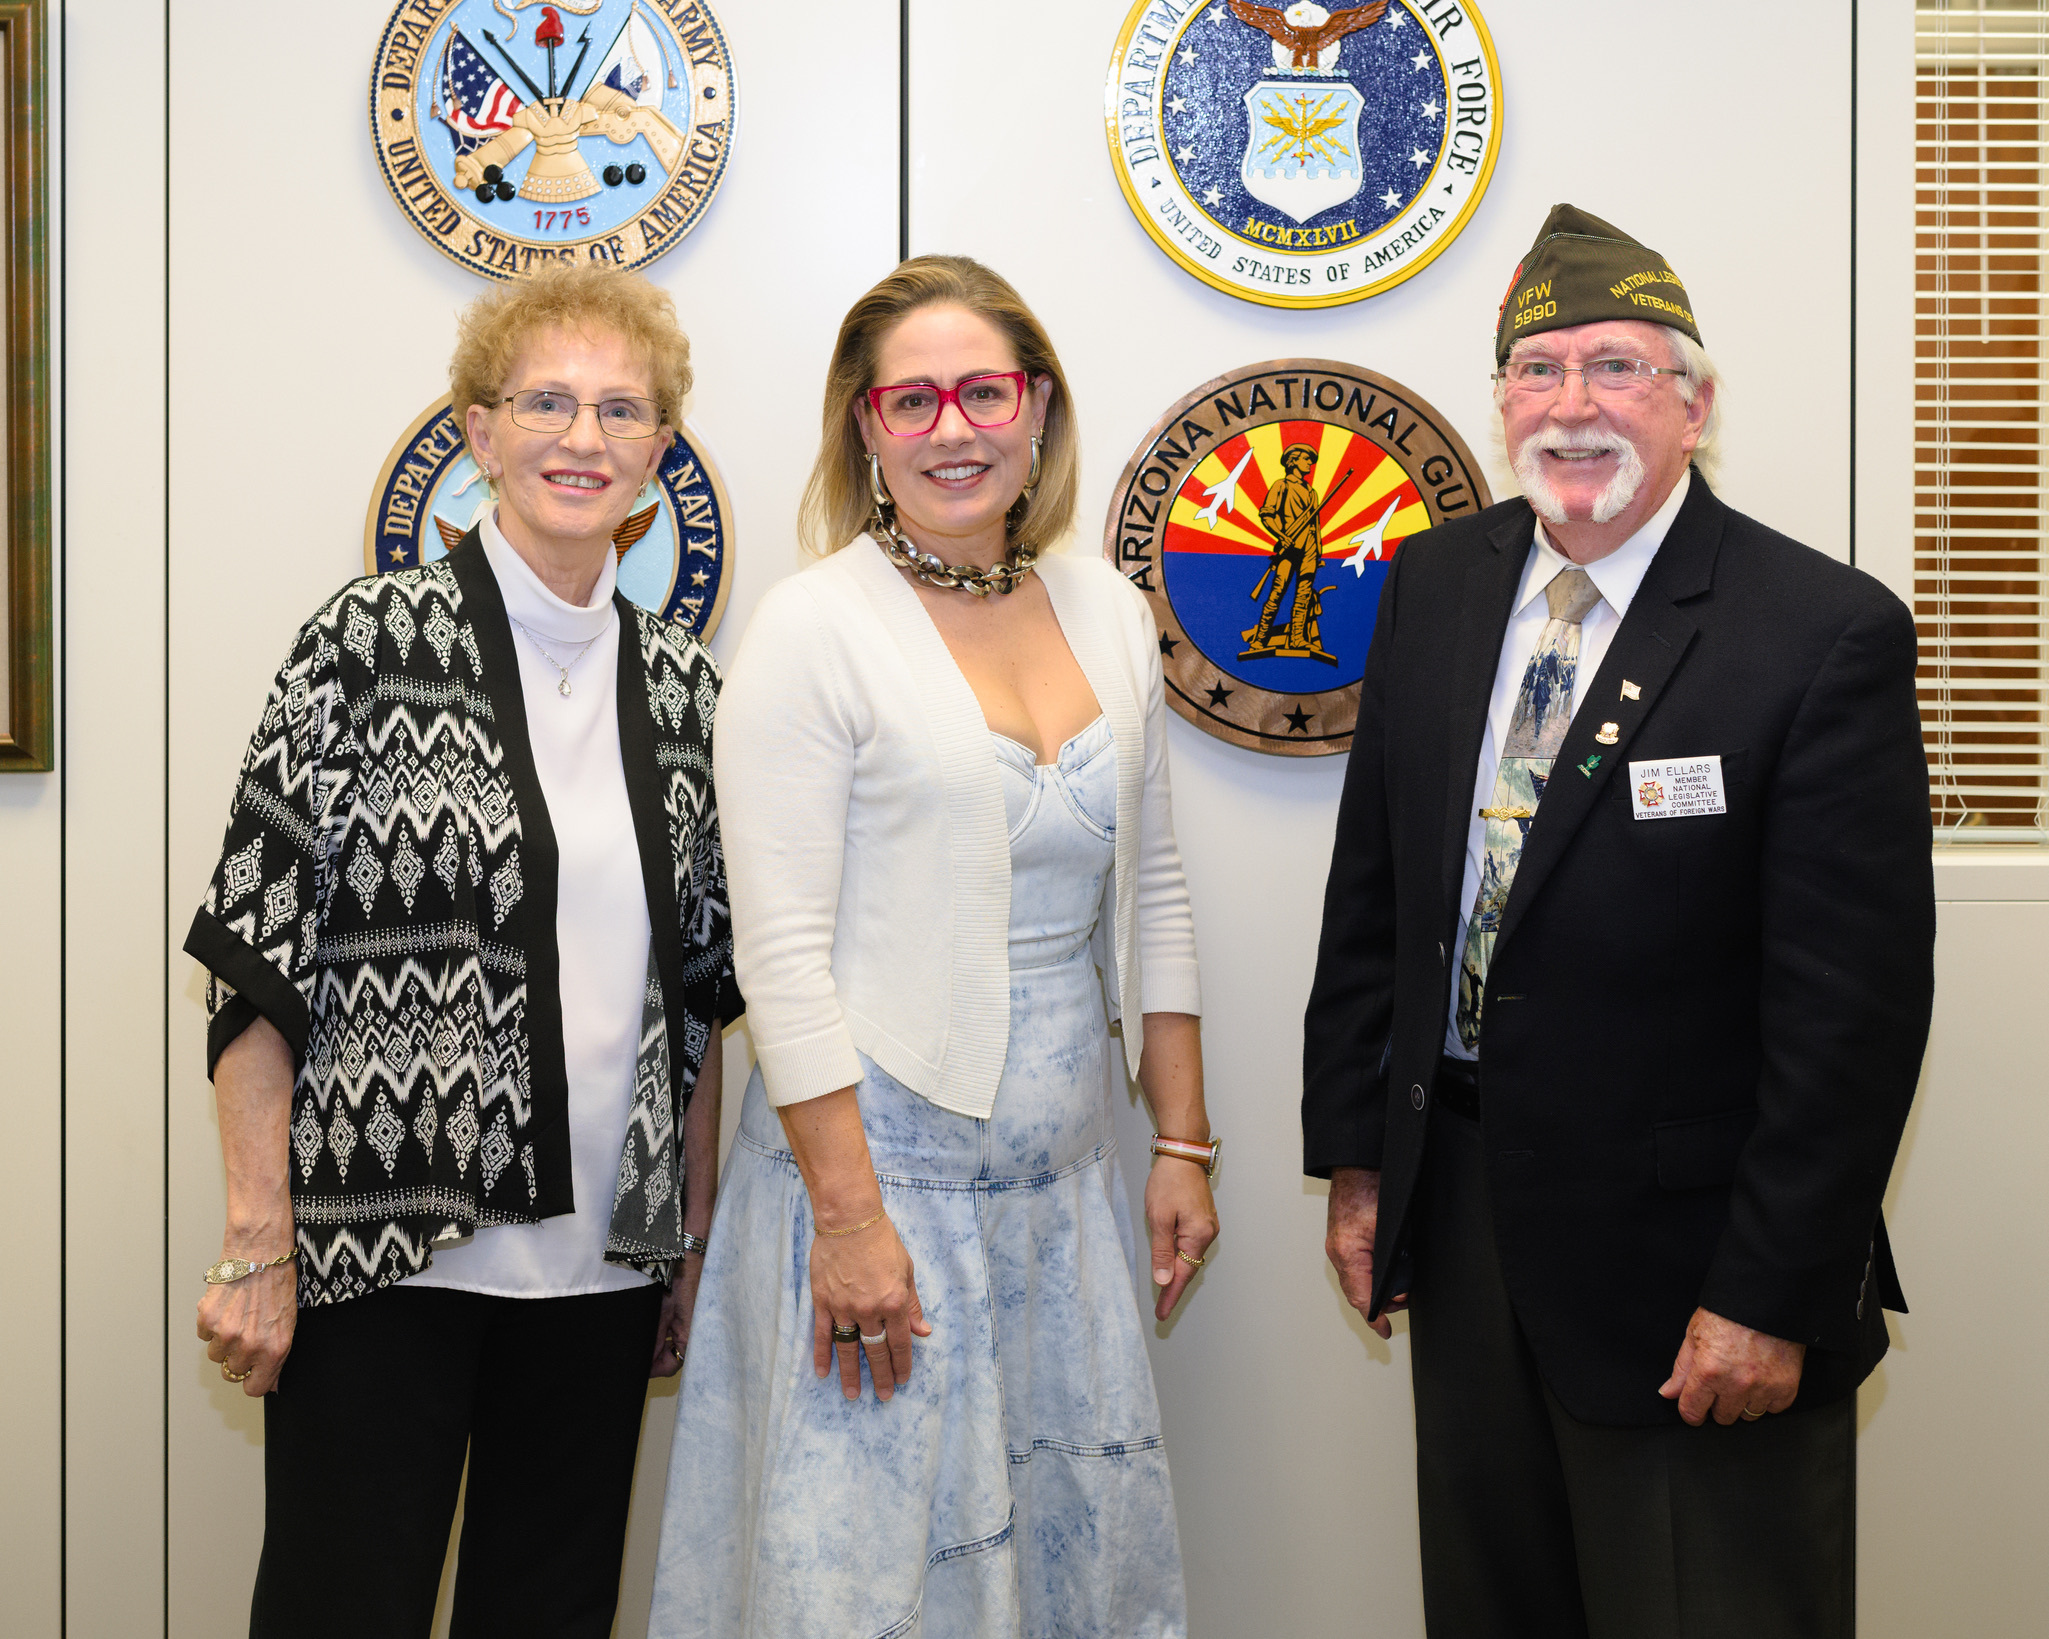 Building On Her Work Delivering for Veterans and Their Families, Sinema Meets with Arizona Veterans of Foreign Wars